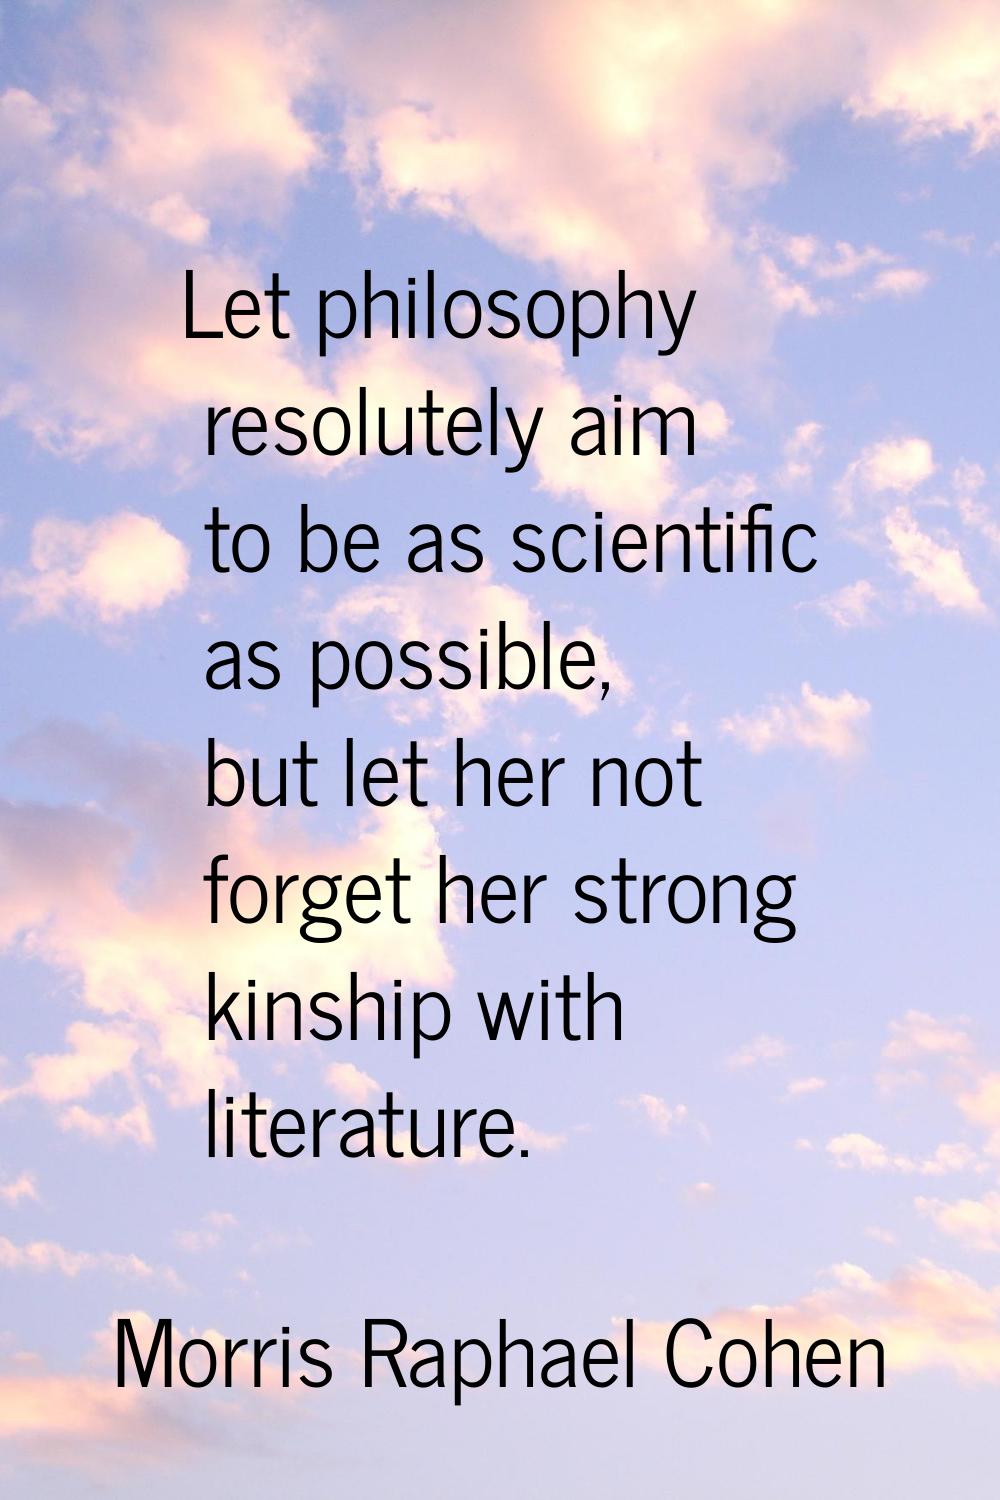 Let philosophy resolutely aim to be as scientific as possible, but let her not forget her strong ki